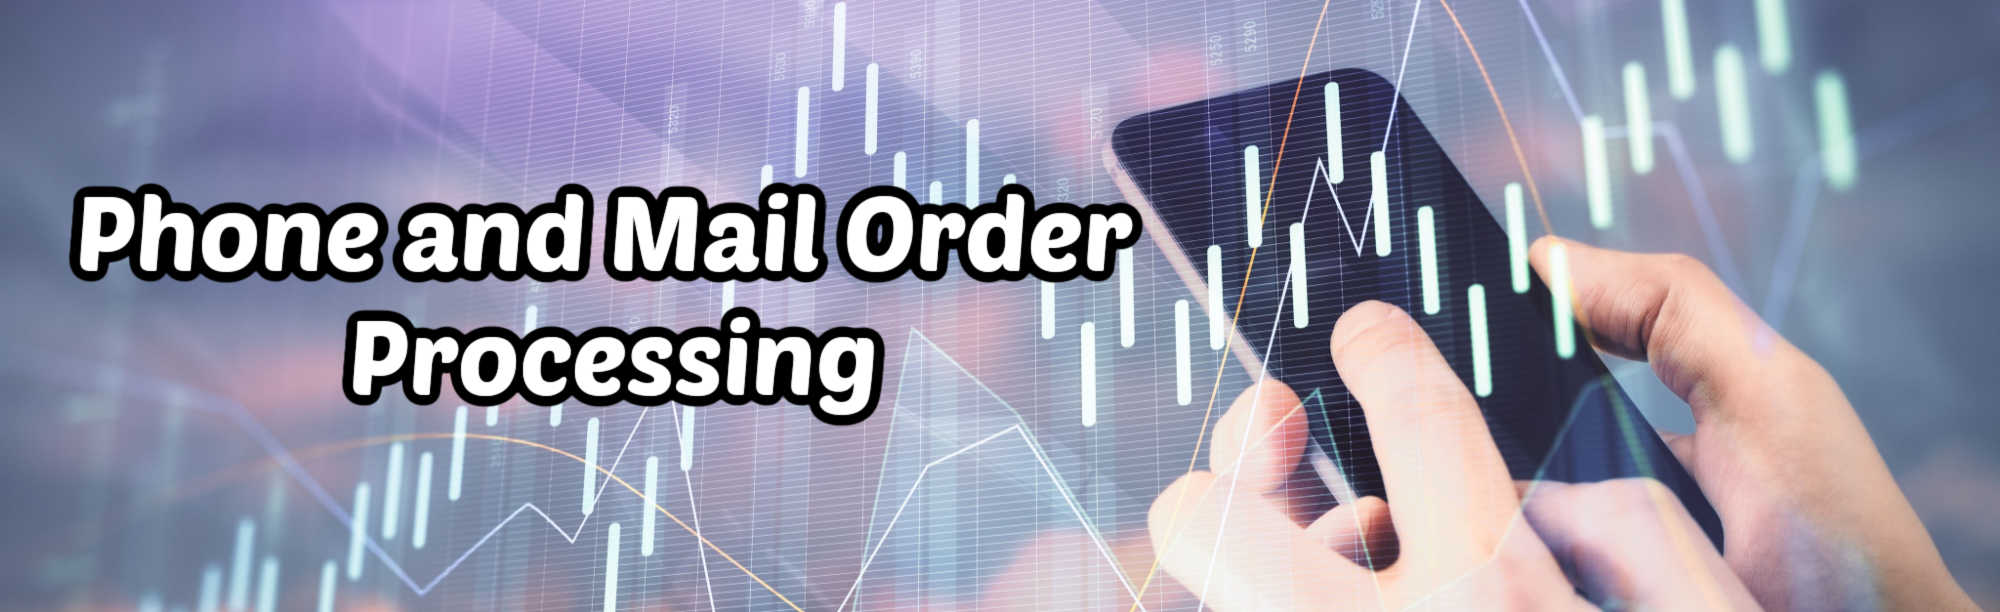 image of phone and mail order processing